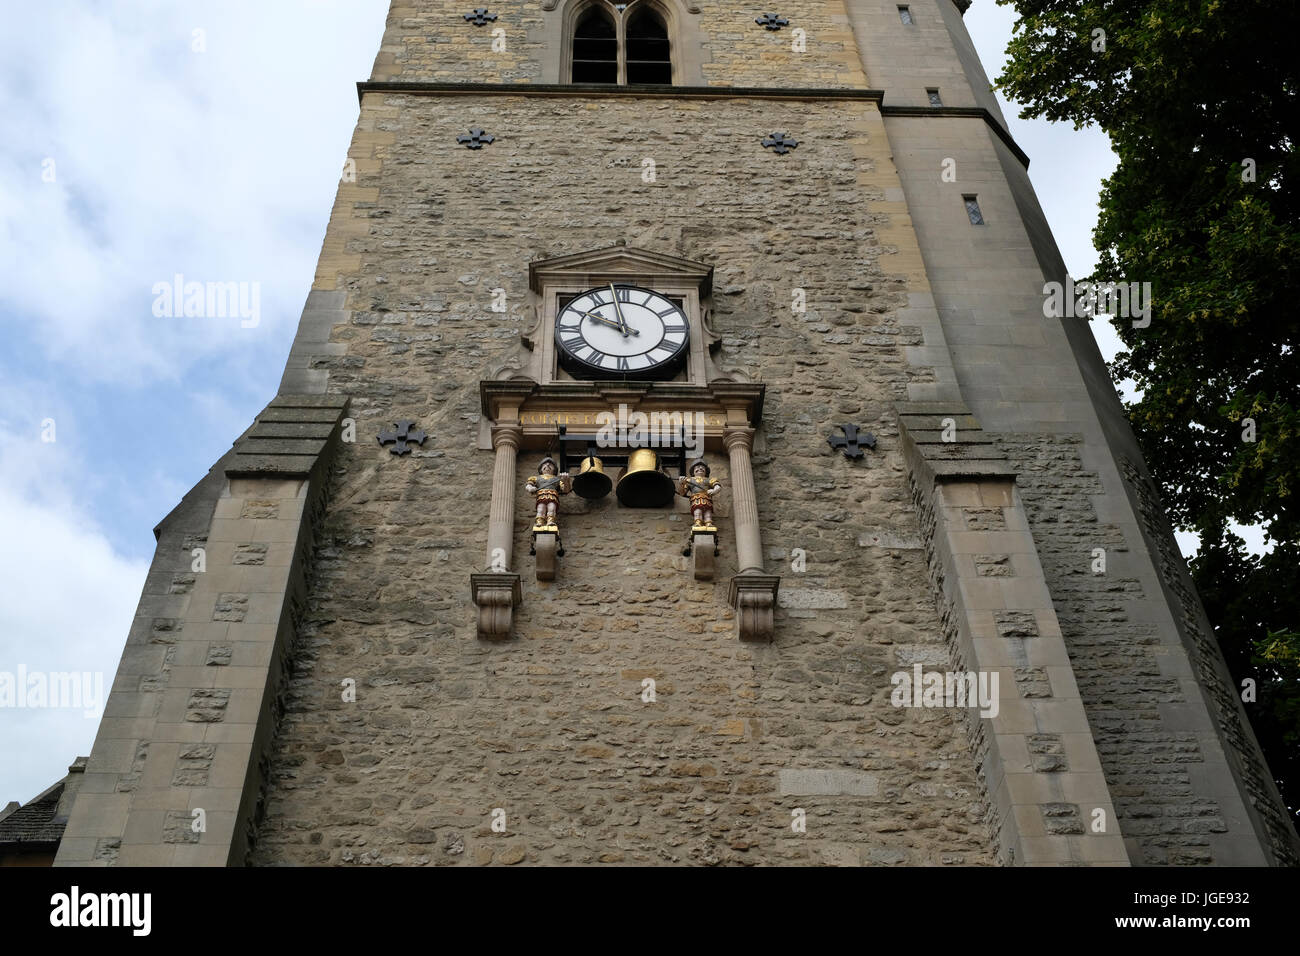 St Martin's Tower - Carfax - Oxford Clock Tower Stock Photo